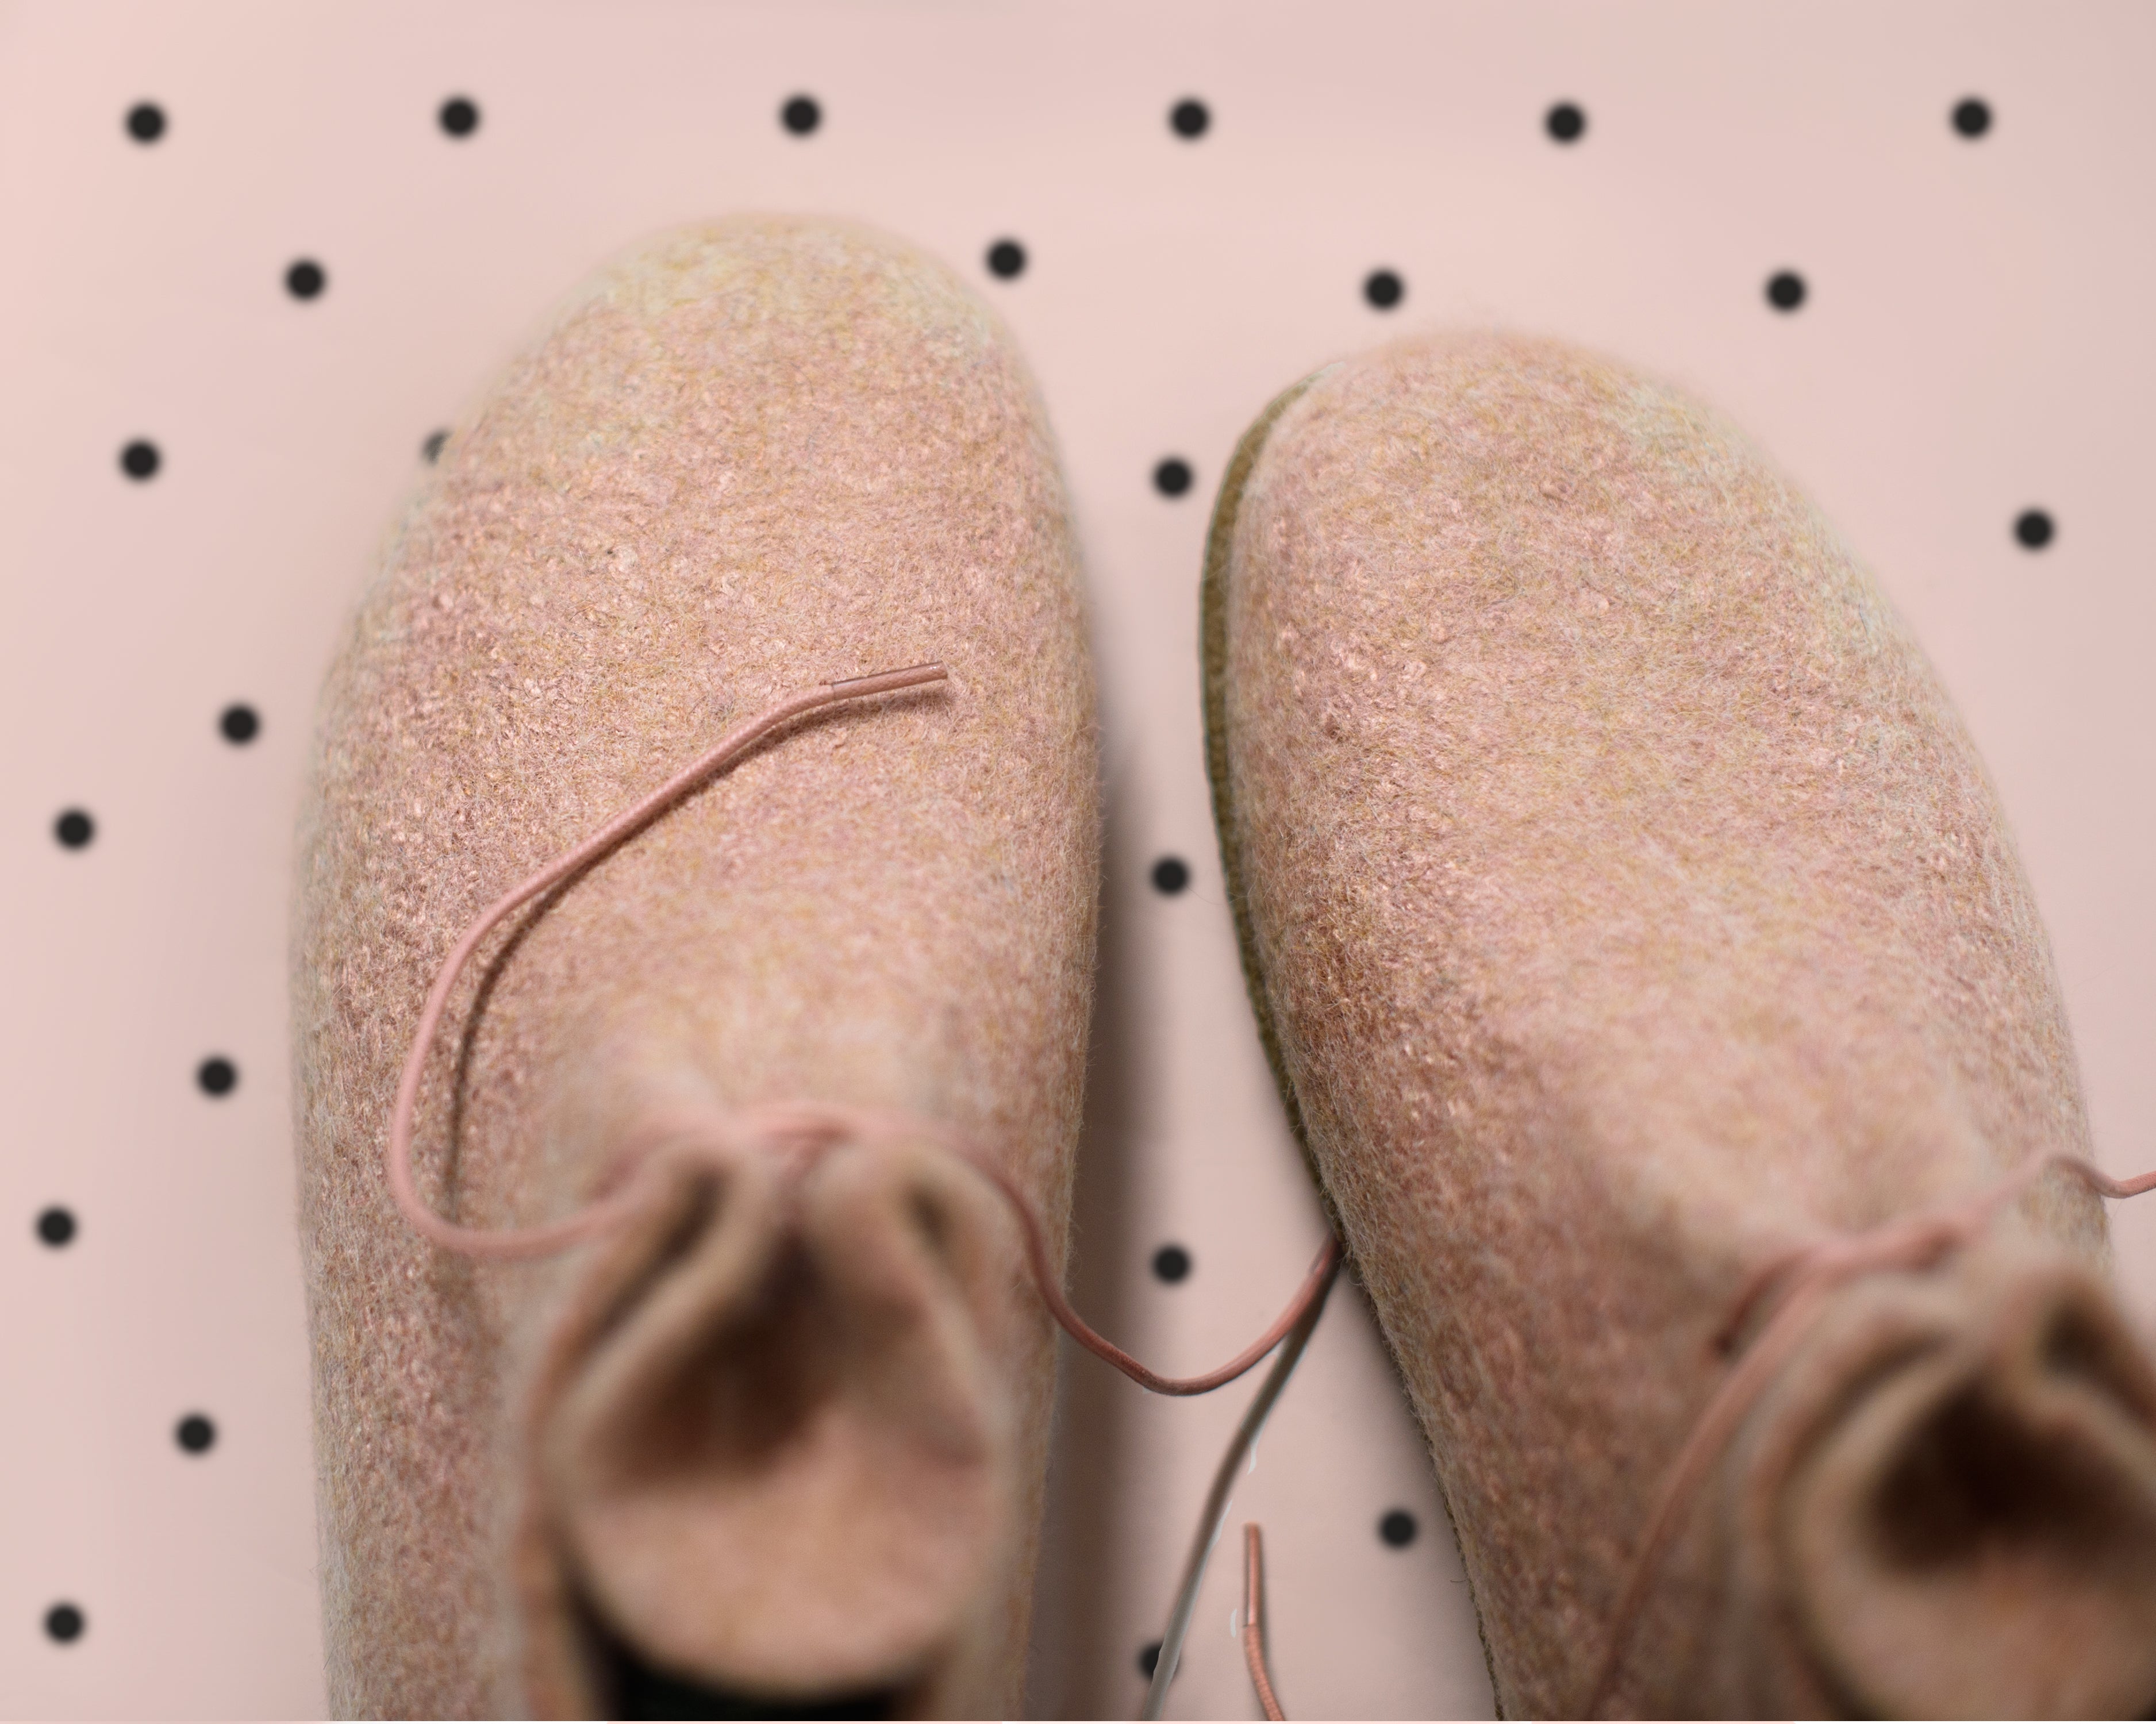 Chance to win a pair of BureBure felted wool – BureBure shoes and slippers